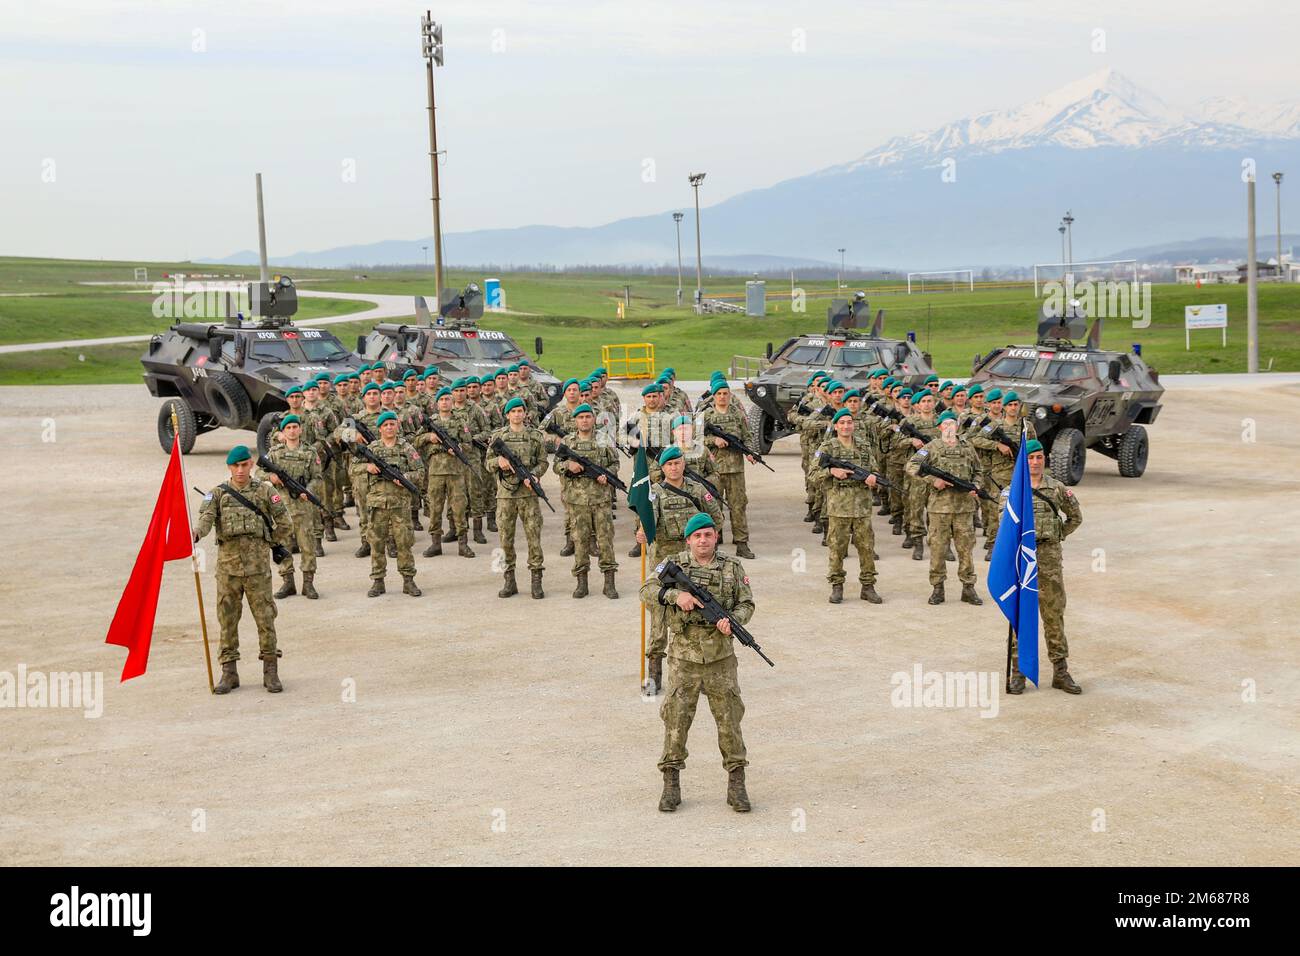 CAMP BONDSTEEL, Kosovo – Turkish Armed Forces Soldiers with the Maneuver Battalion, Regional Command East, Kosovo Force, stand in formation for a photo on Camp Bondsteel, Kosovo, April 16, 2022. The Turkish contingent is working alongside NATO partners to support the mission of sustaining a safe and secure environment and freedom of movement in Kosovo. Stock Photo